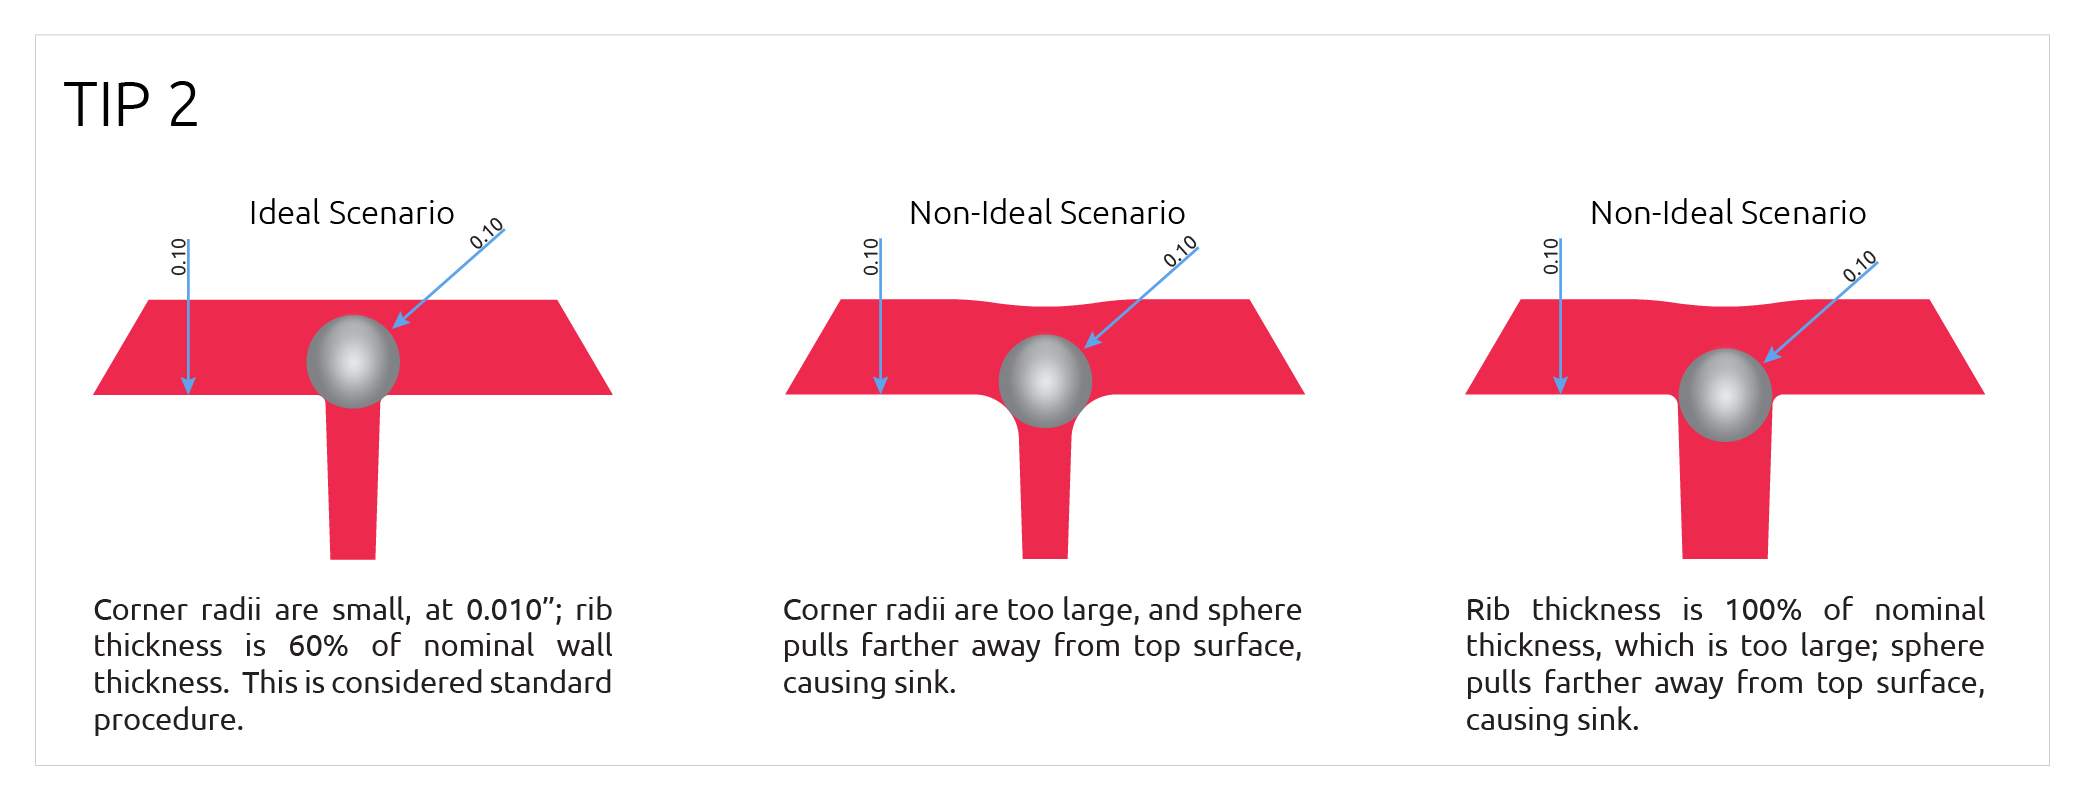 Tip 2 | ideal scenario, corner radii are small, at 0.010"; rib thickness is 60% of nominal wall thickness. This is considered standard procedure. Non-ideal scenario, Corner radii are too large, and sphere pulls farther away from top surface, causing sink. Non-ideal scenario, Rib thickness is 100% of nominal thickness, which is too large; sphere pulls farther away from top surface, causing sink.